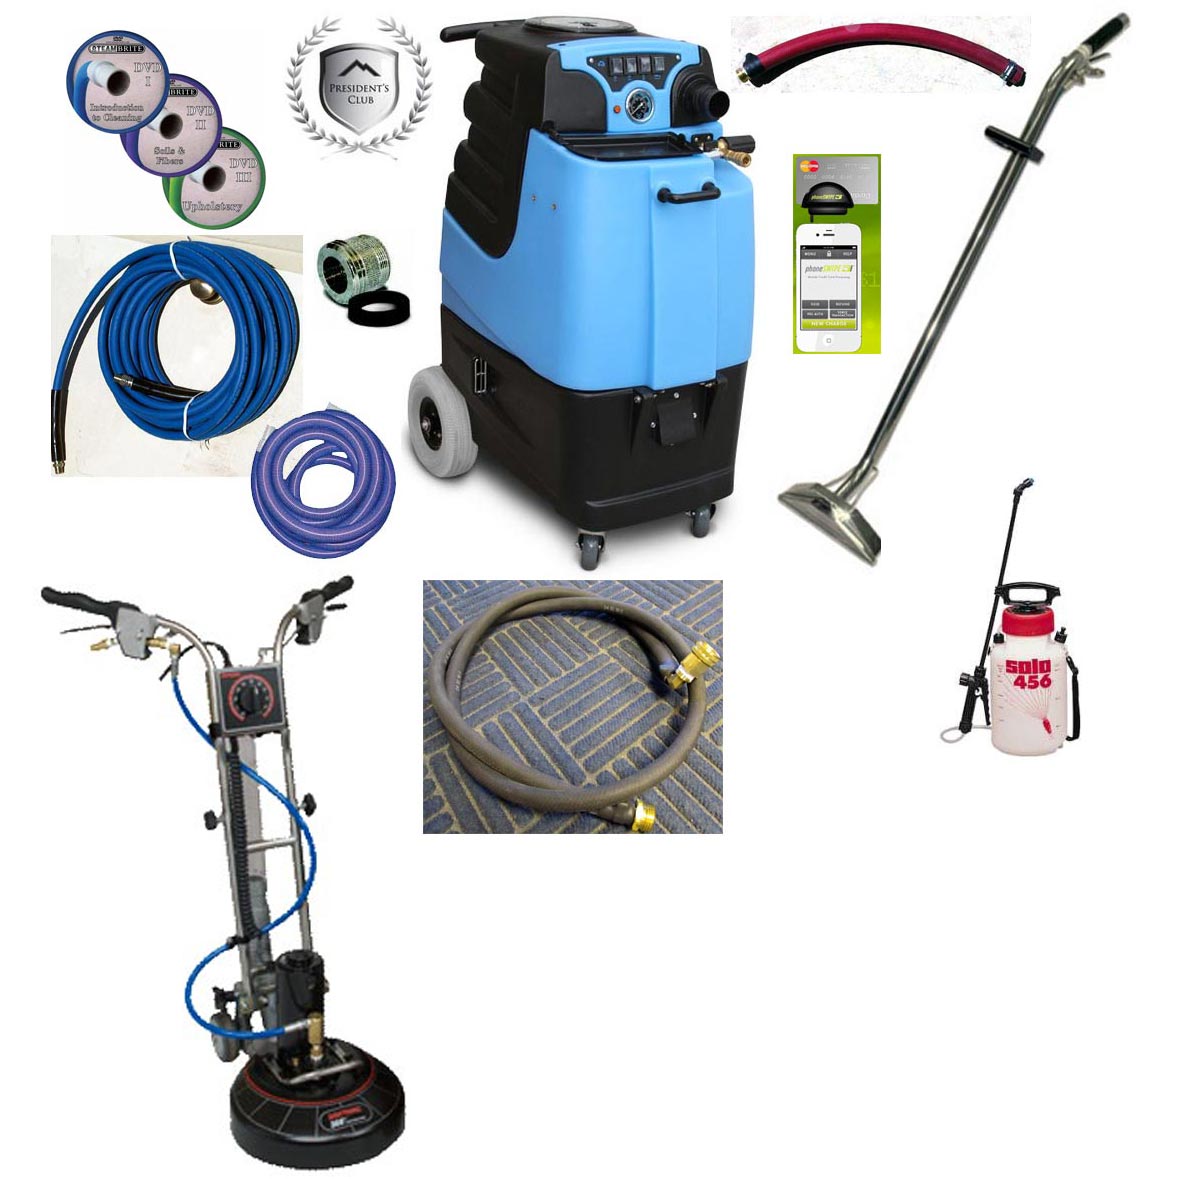 Rotovac 360i - Professional Tile & Grout Cleaning Machines from